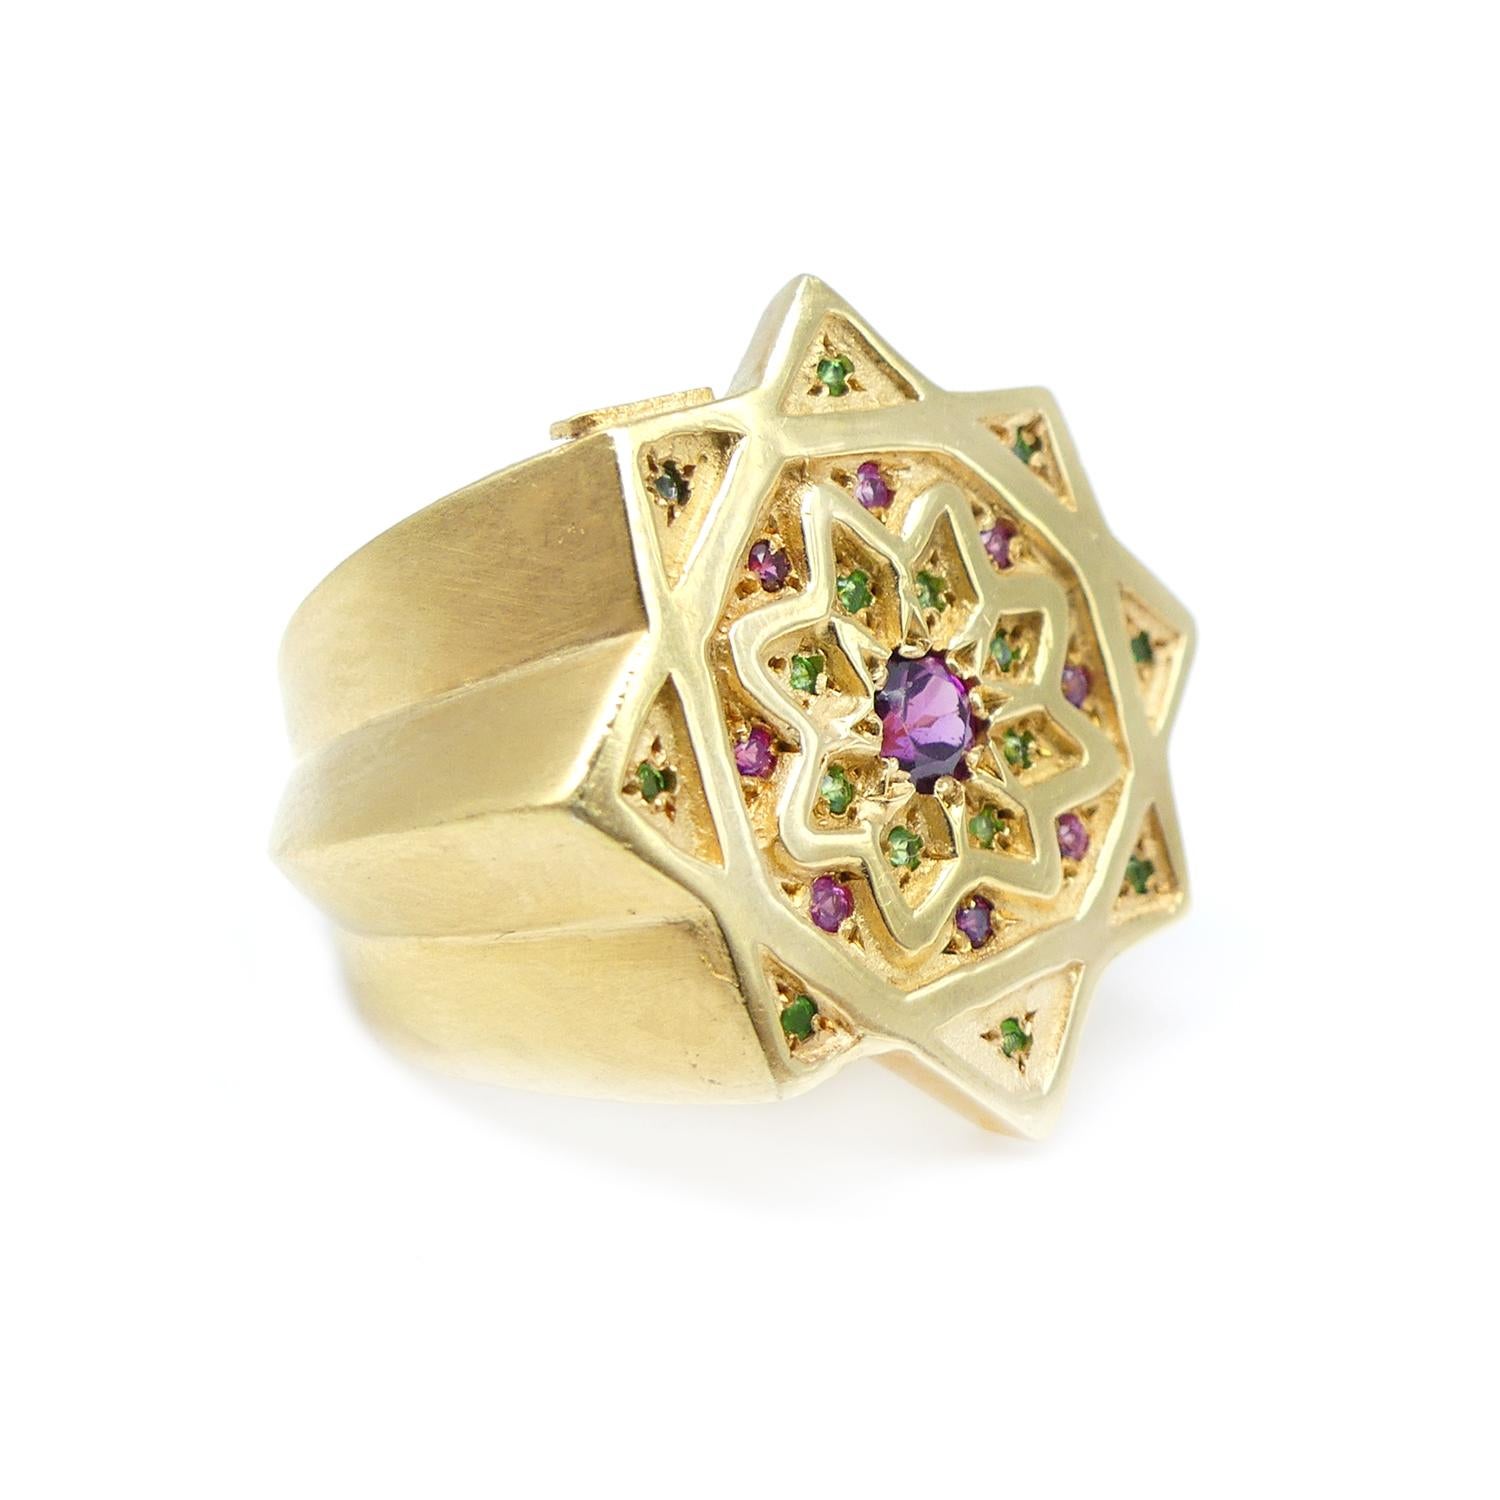 Vicente Gracia Amethyst Rubies Tsavorites Silver Gold Plated Ring

Ring in silver gold plated with central amethyst, rubies and tsavorites.

The eight pointed star represent the Fountain of Life that symbolizes the expansion of the soul. Inside, a